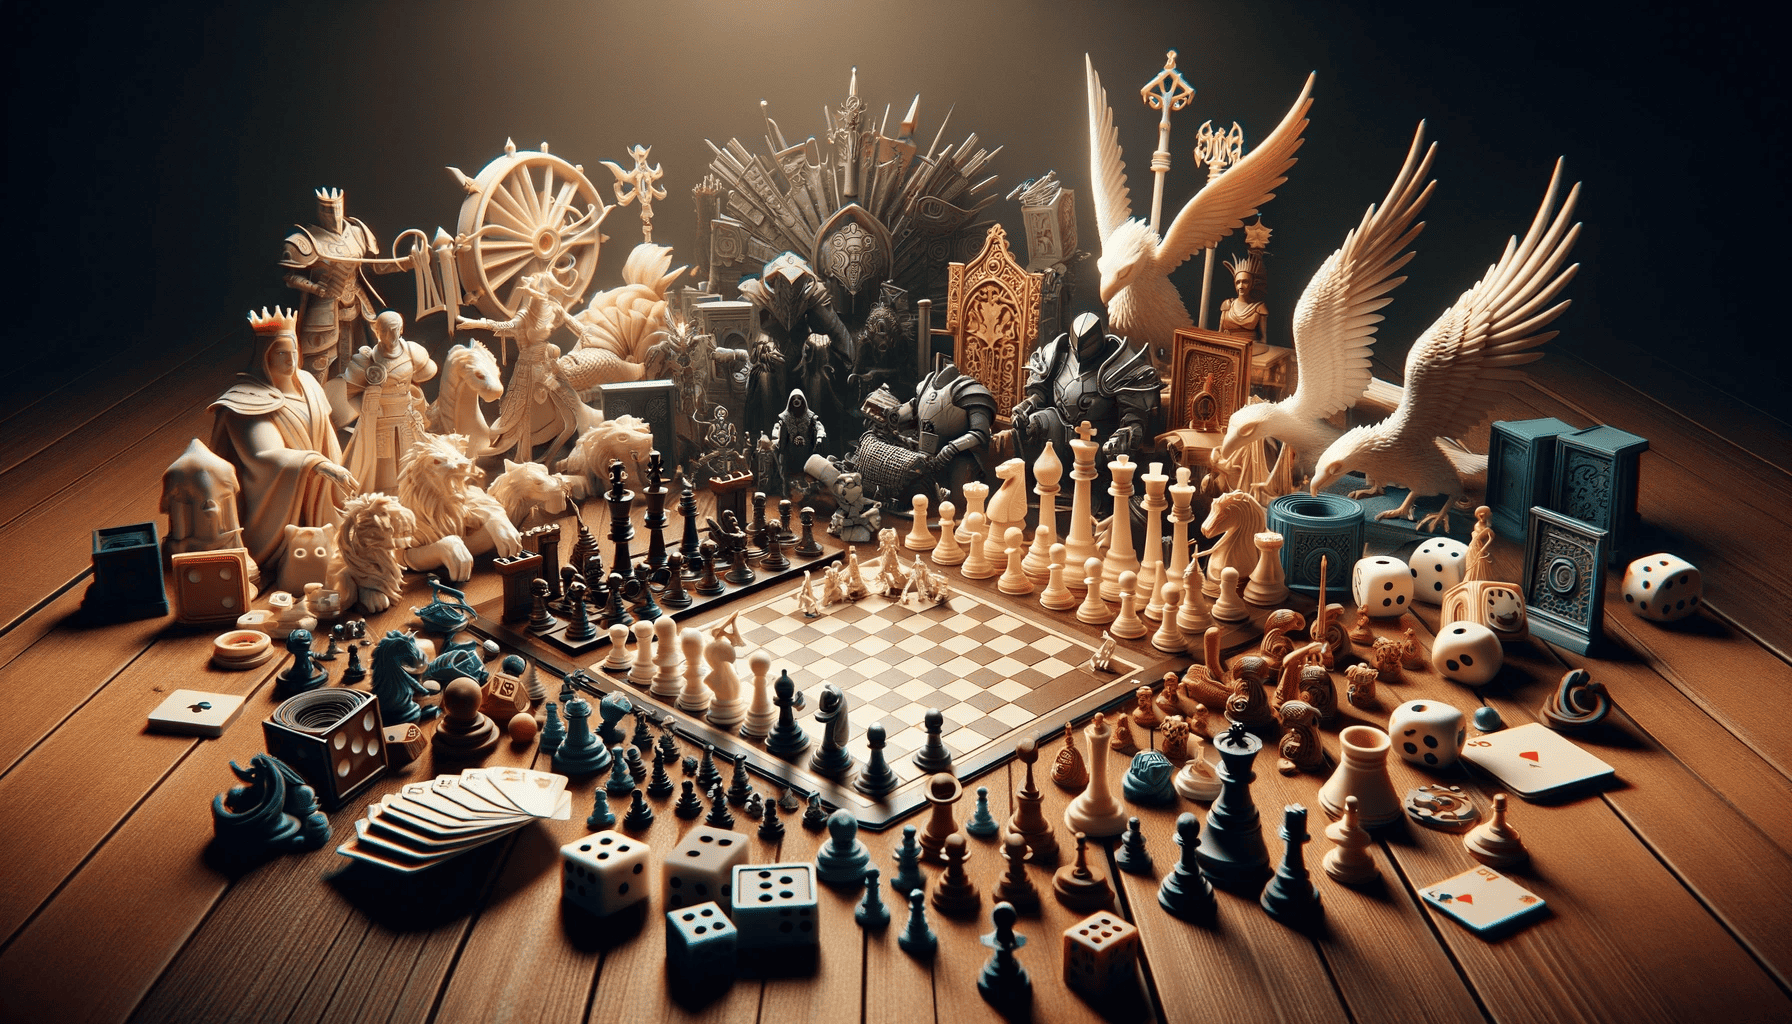 Featured image of game pieces or 3d printed objects on a table